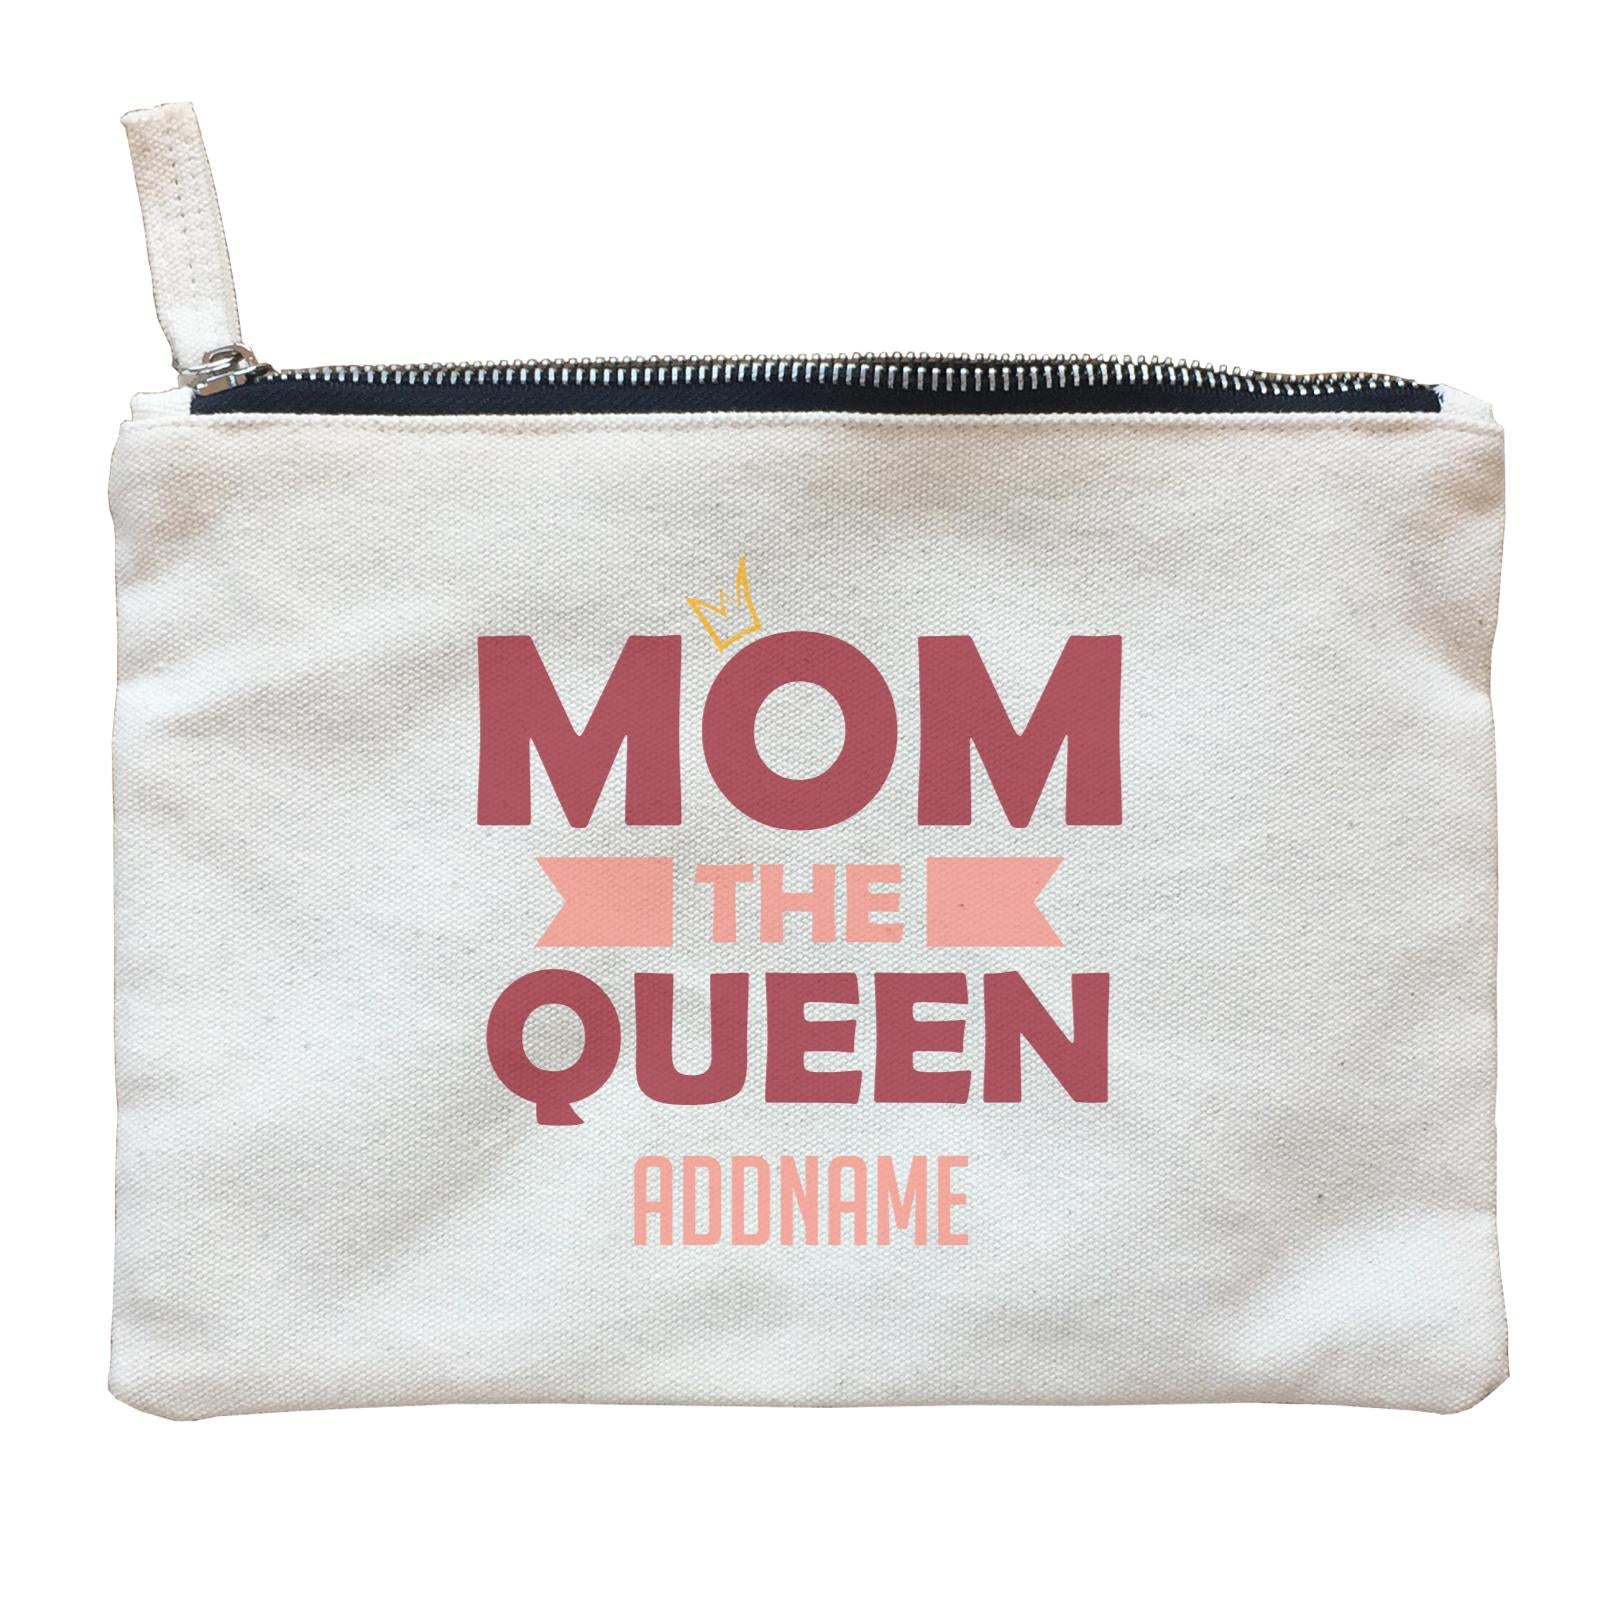 Awesome Mom 2 Mom The Queen Addname Zipper Pouch